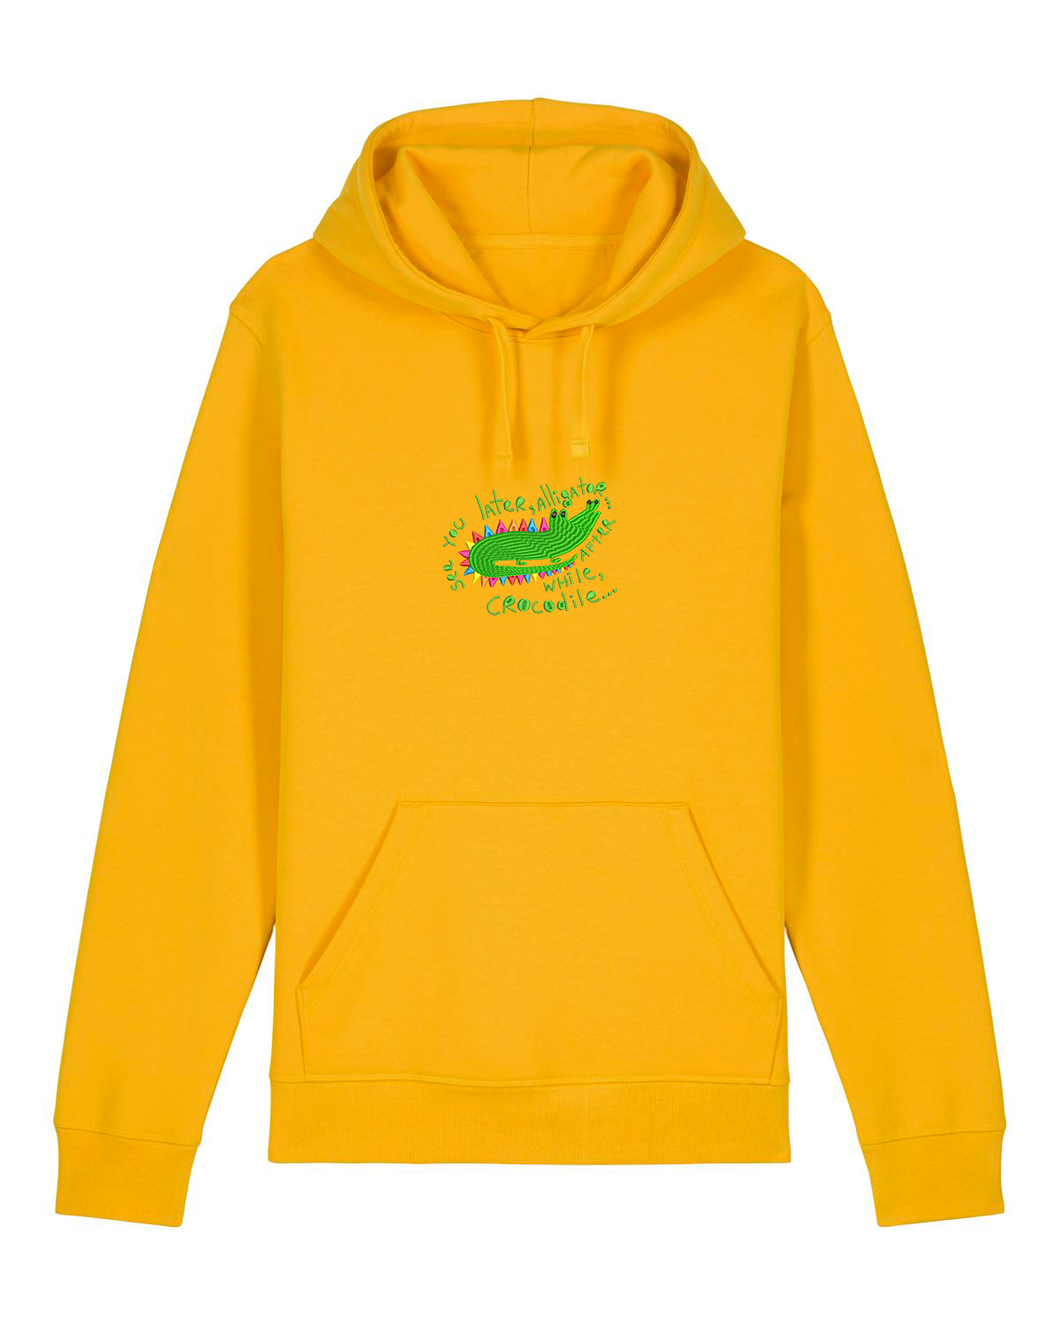 See you later, alligator...🐊 - Embroidered UNISEX hoodie